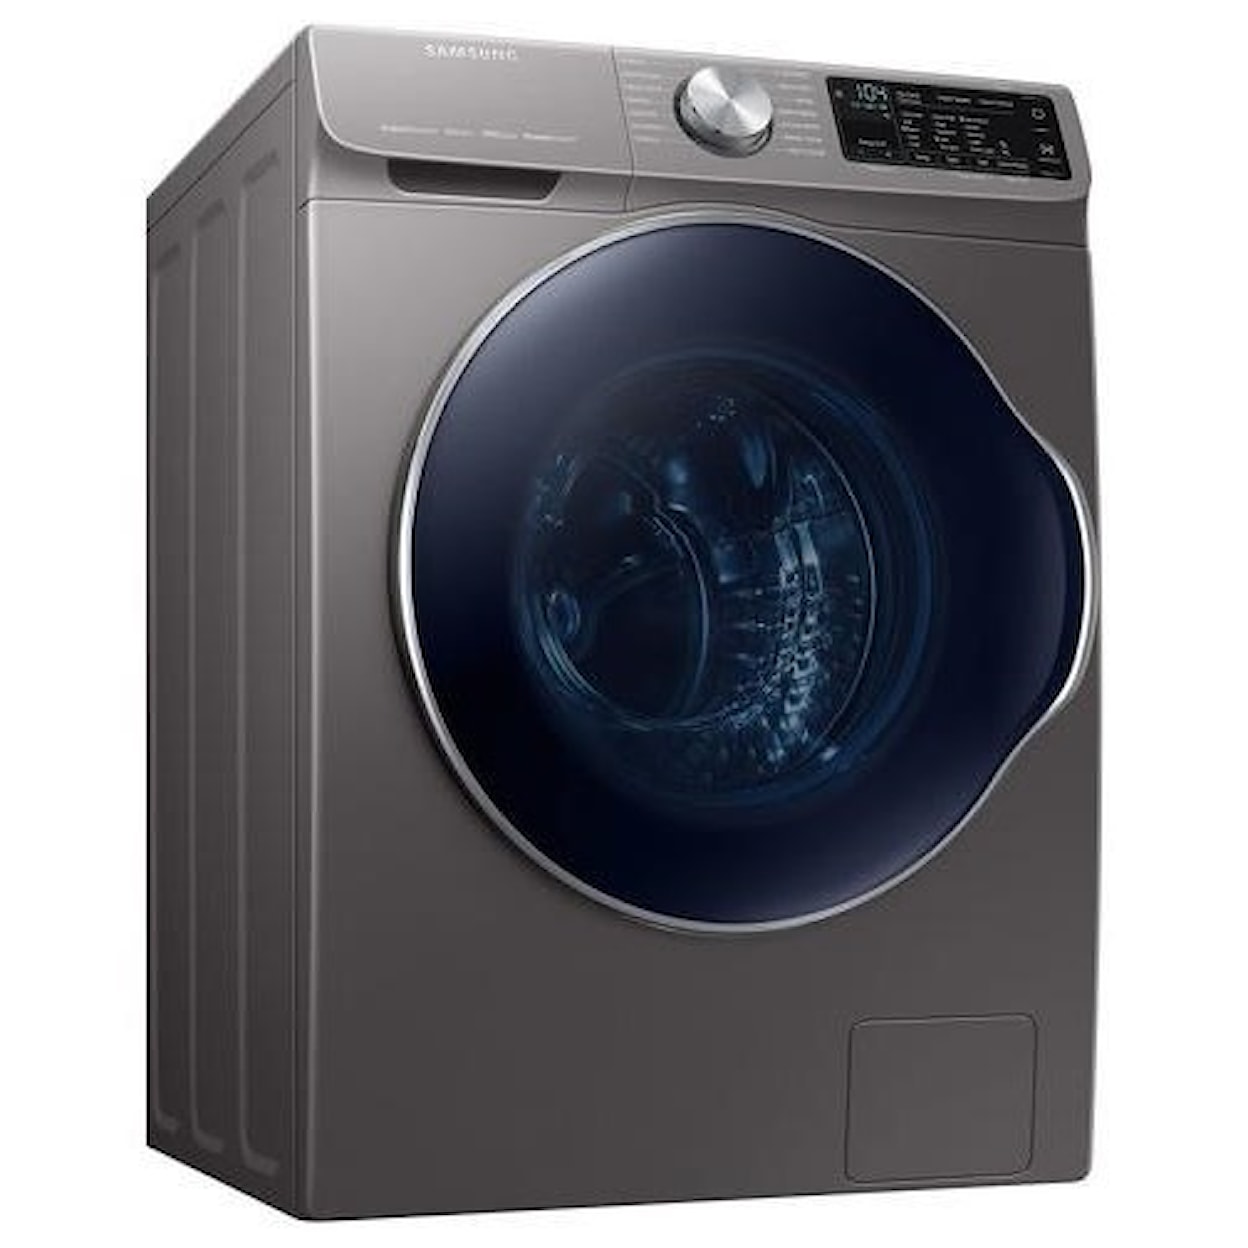 Samsung Appliances Front Load Washers - Samsung WW6850 2.2 cu. ft. 24" Front Load Washer